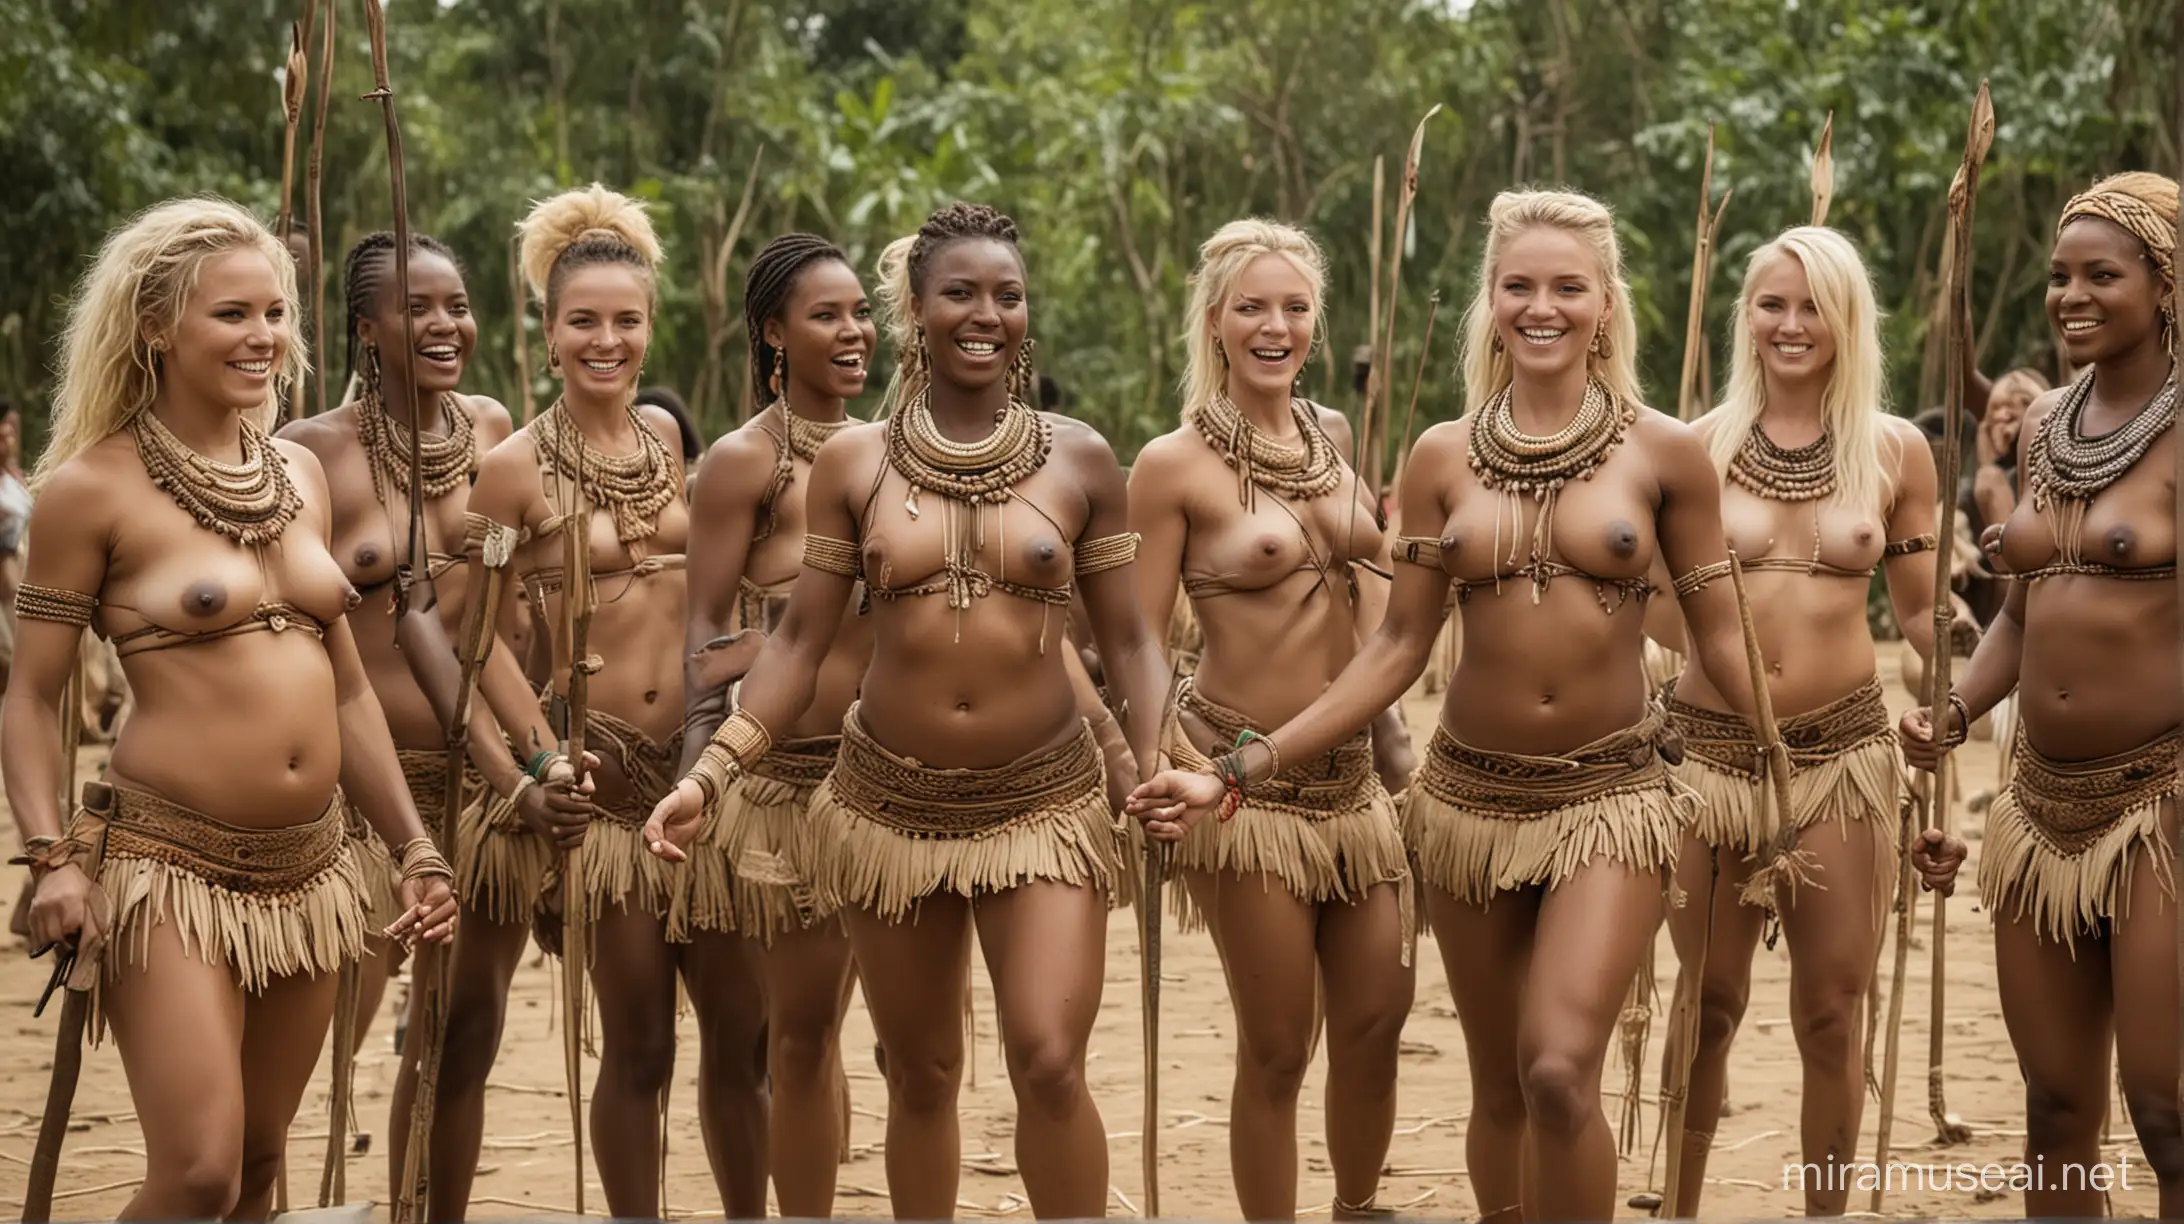 African and Amazonian Women Celebrating Tribal Ritual with Spears